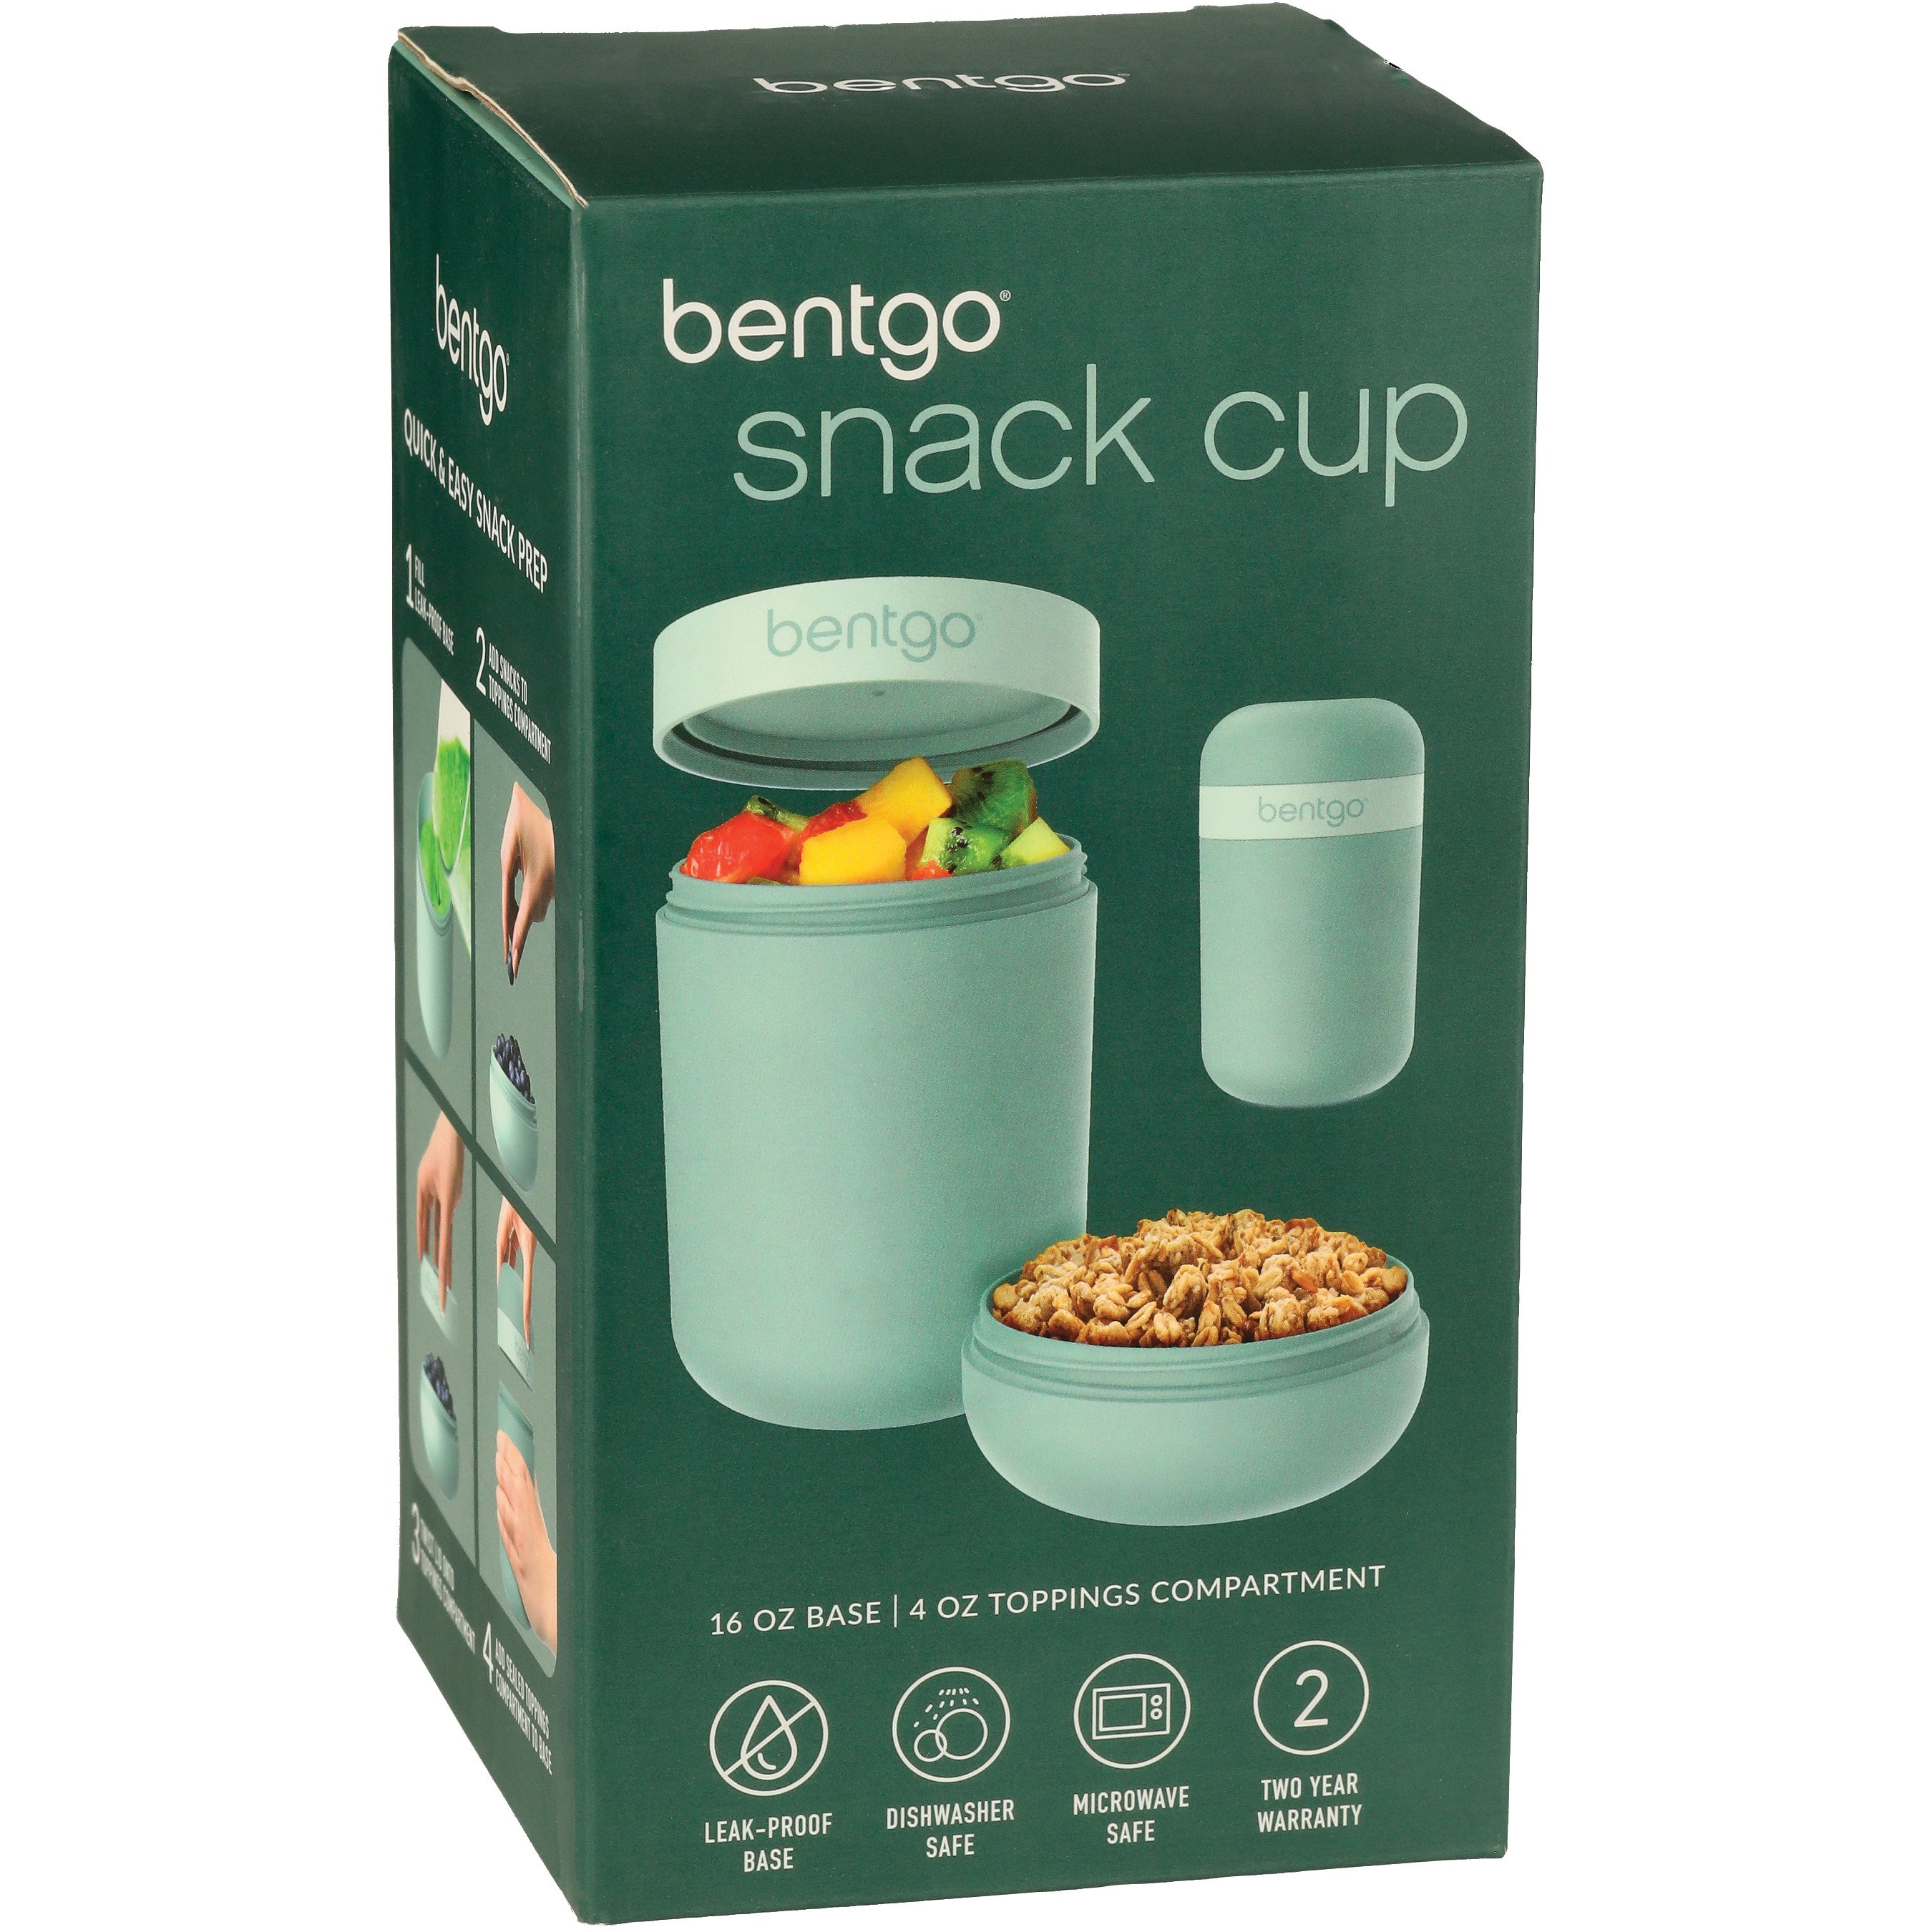 Bentgo Snack Cup - Mint Green - Shop Food Storage at H-E-B